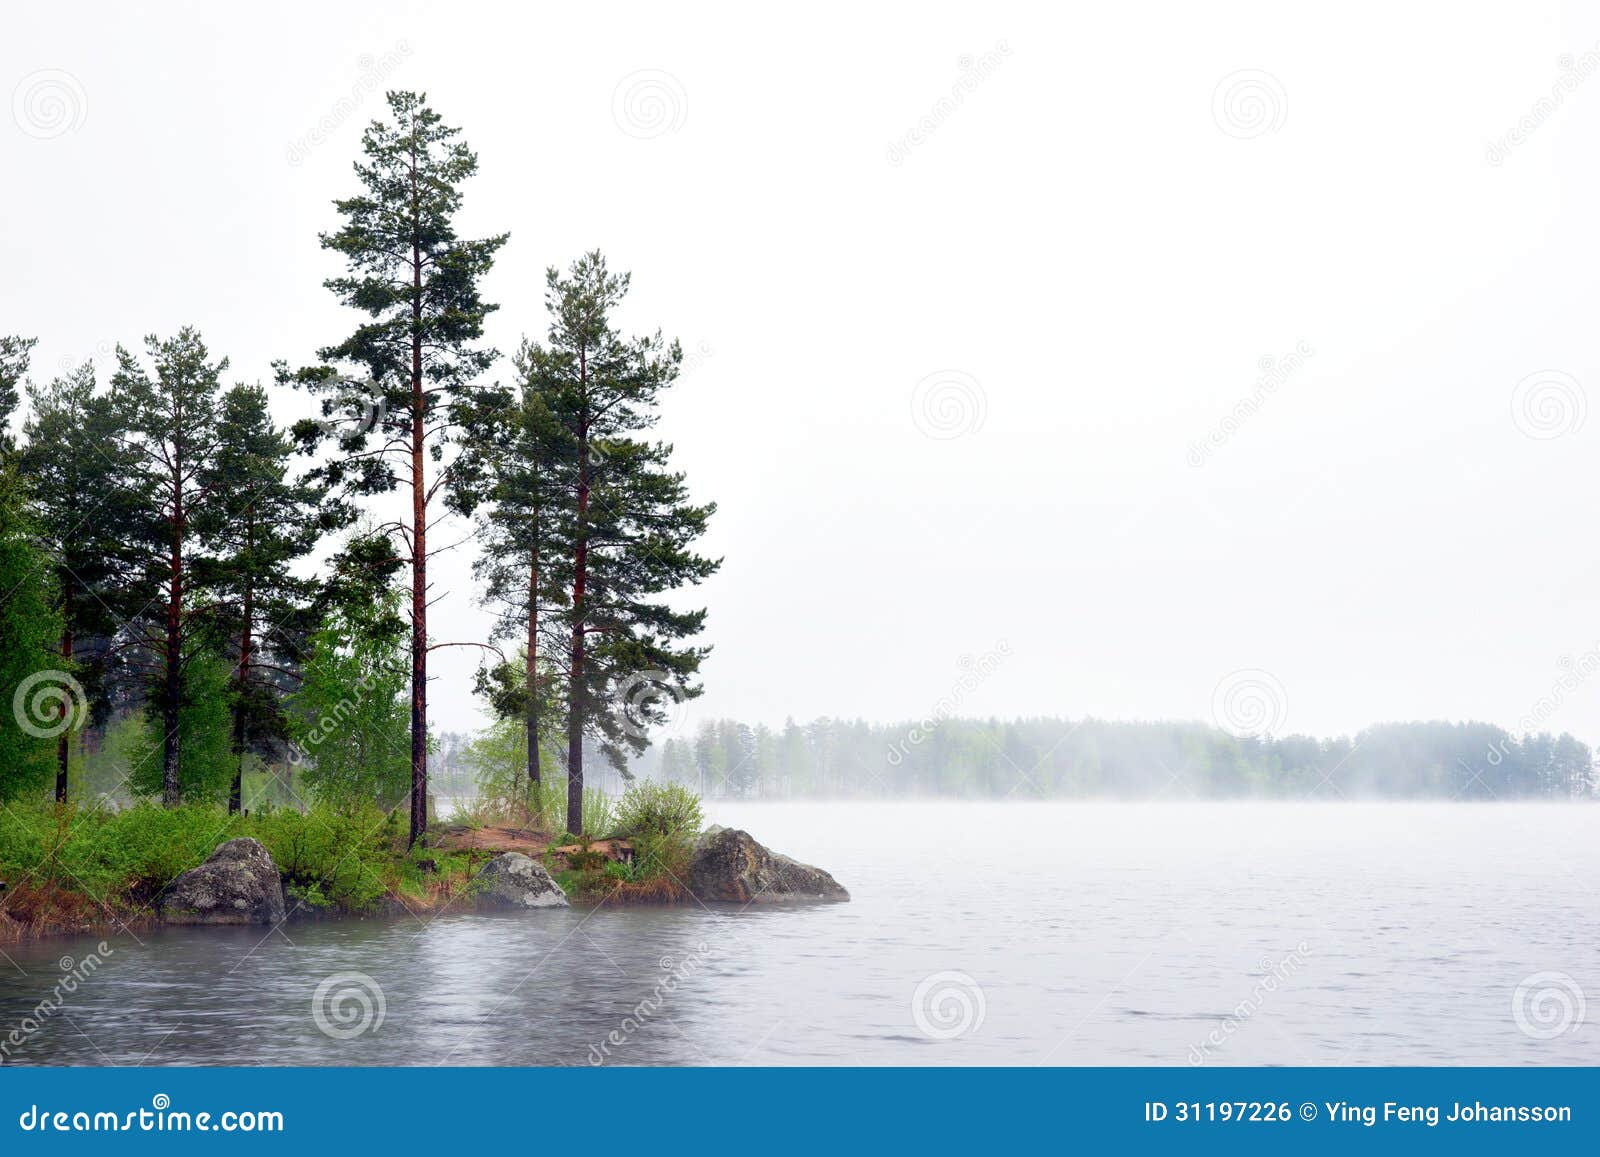 sea with conifer trees in fog